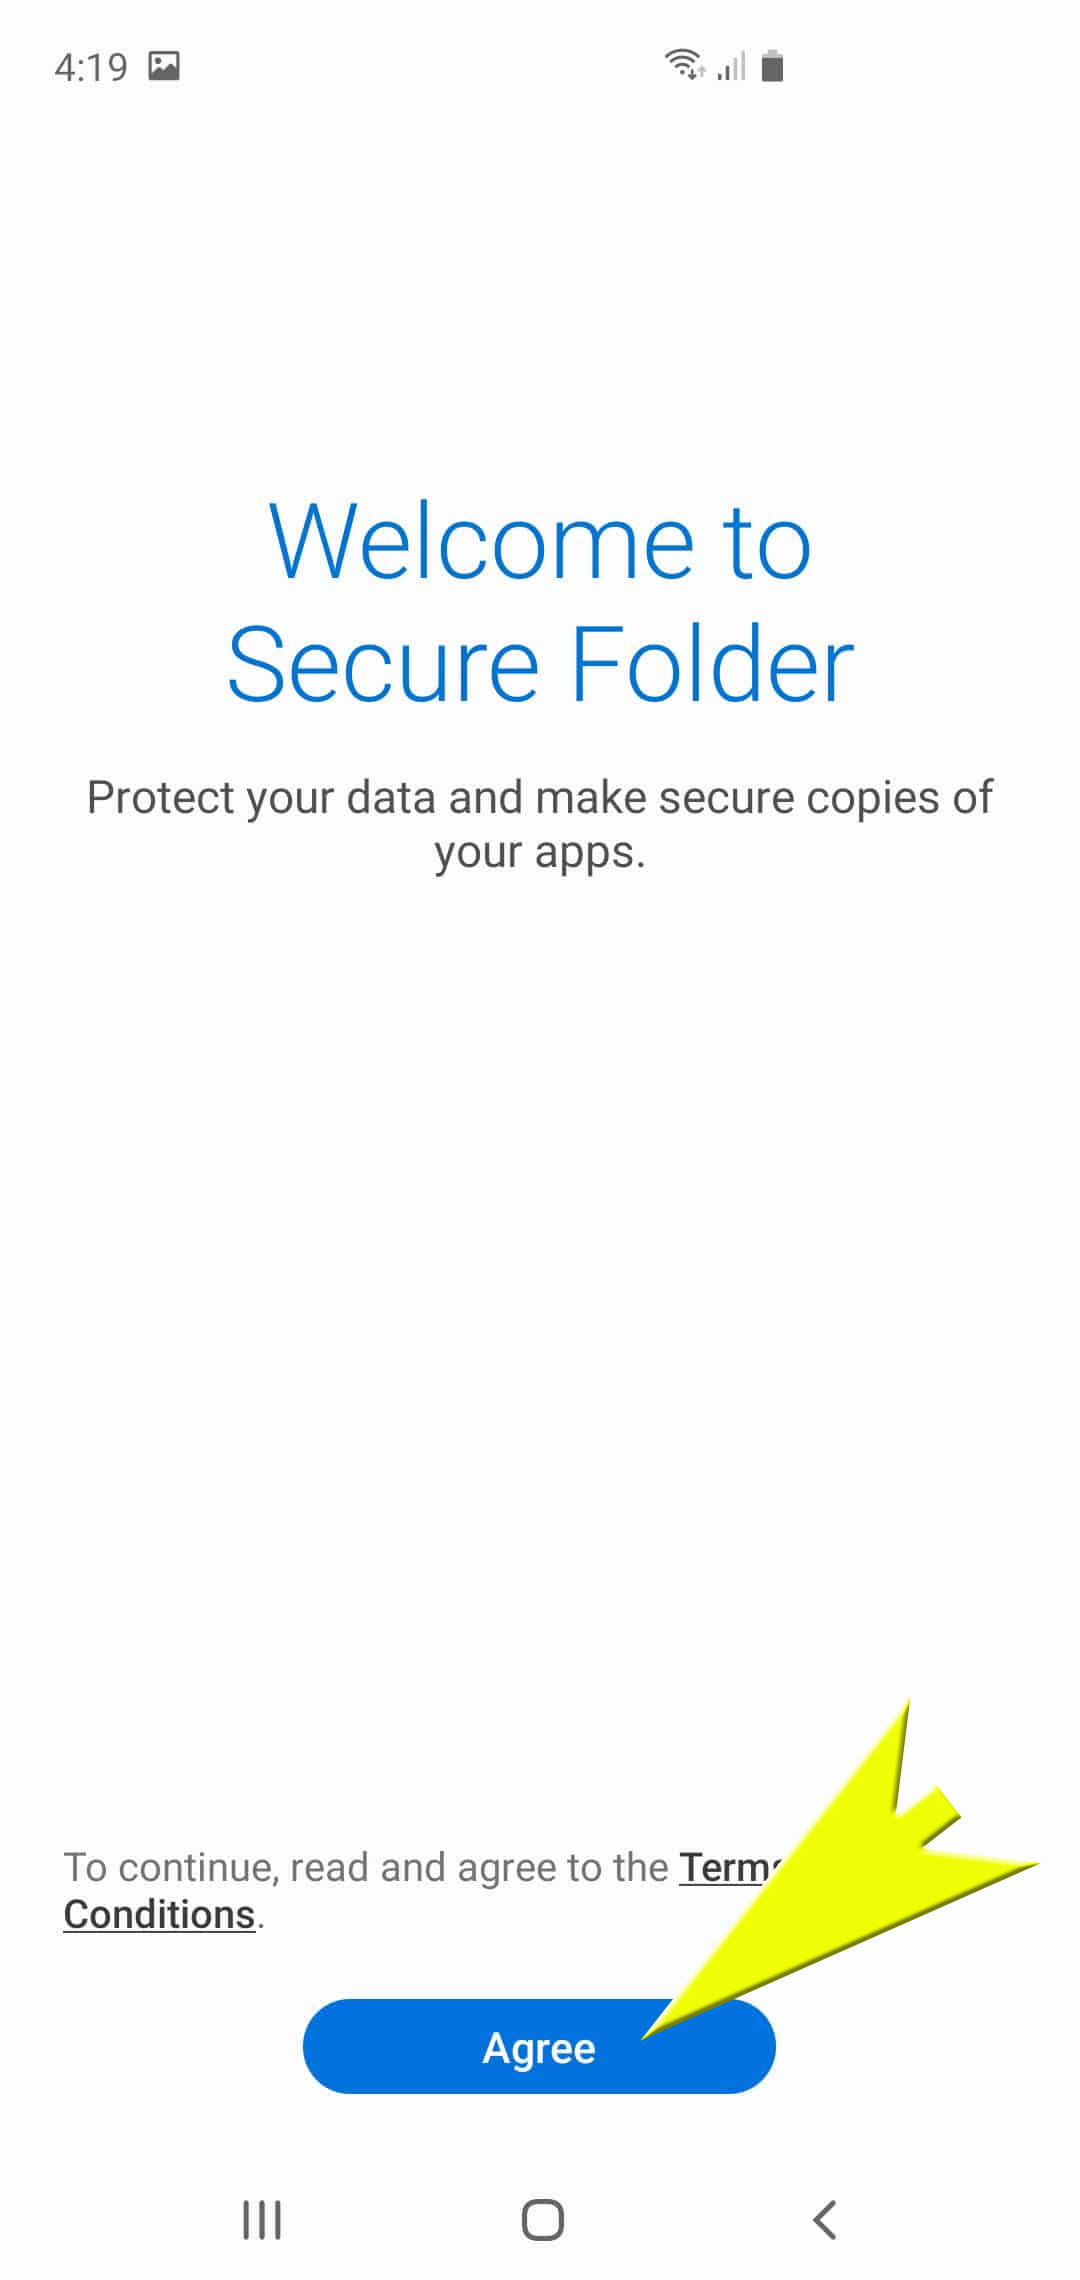 create a secure folder galaxy s20 - secure folder agree to terms and condition